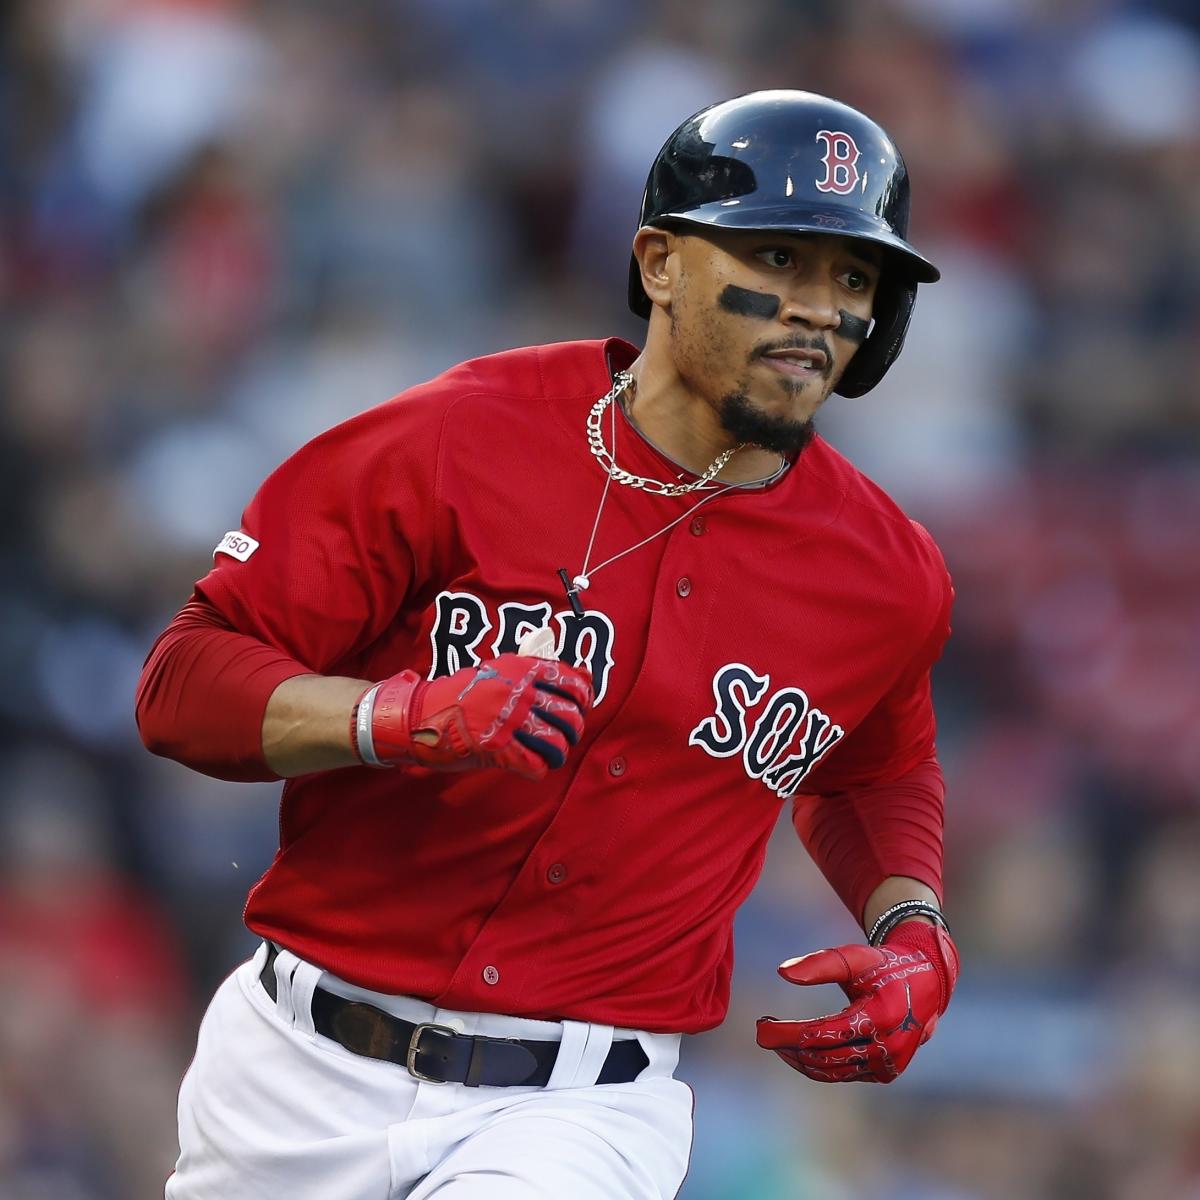 Mookie Betts continues his strong start to 2015 Red Sox season